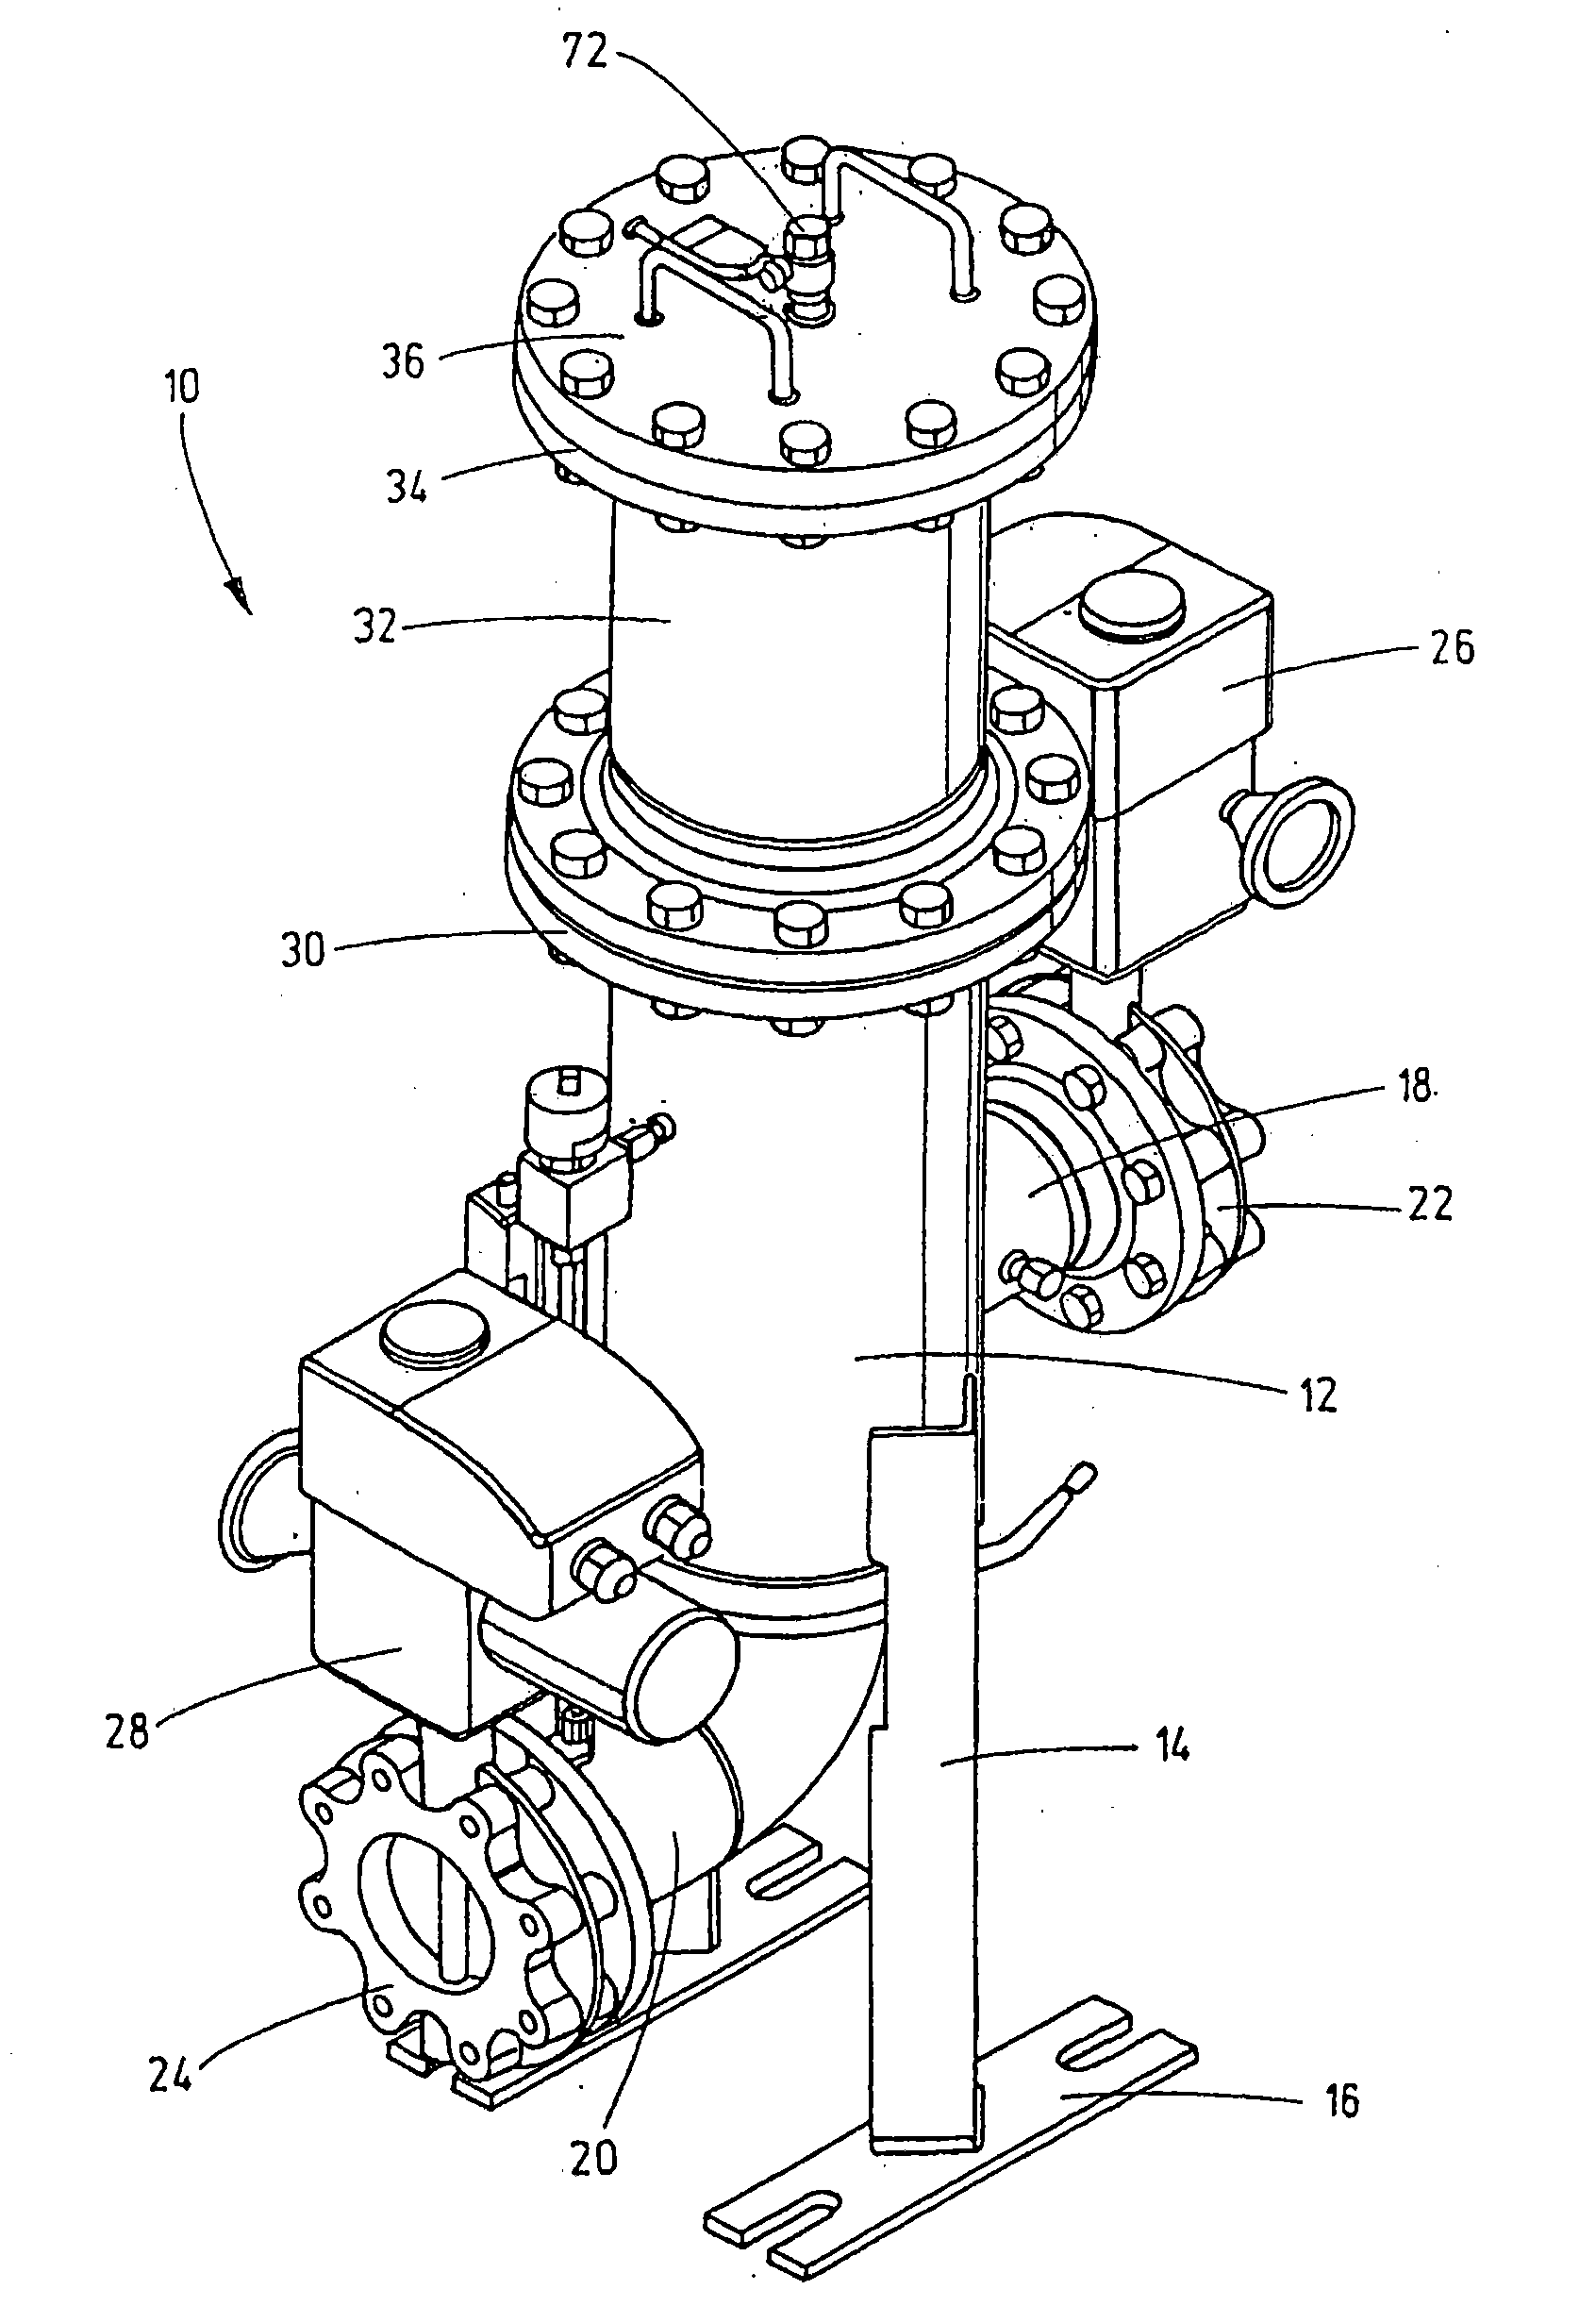 Filter with data storage provided with an antenna for transmitting signals